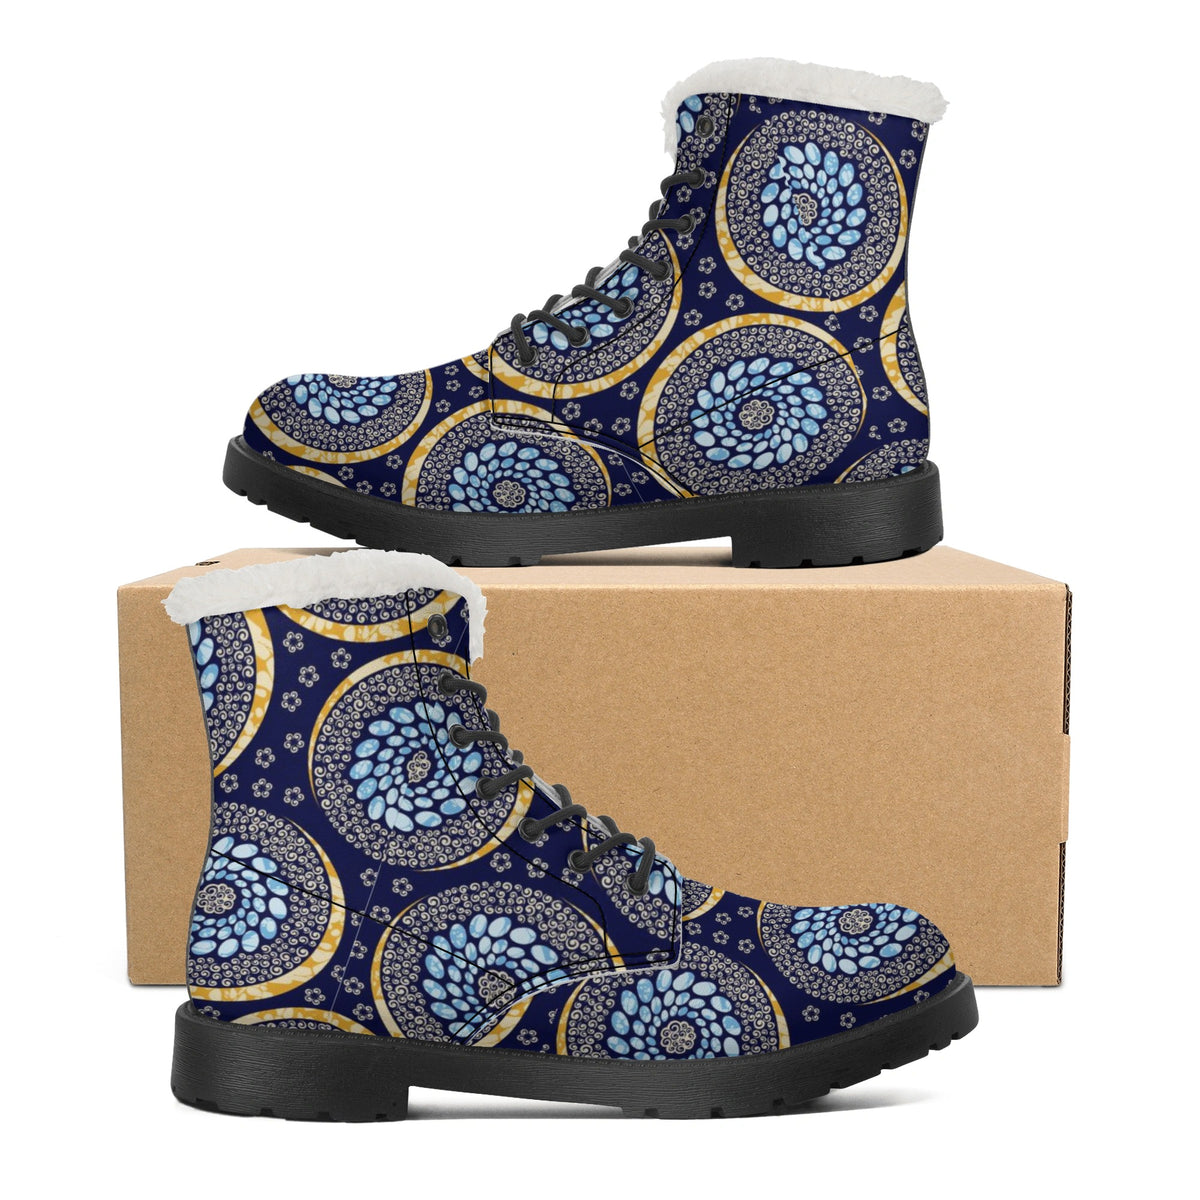 Rosy Brown Men's Faux Fur Leather Boots in Beautiful African Ankara Prints with vibrant colors Sumbu African Ankara Prints and Designs